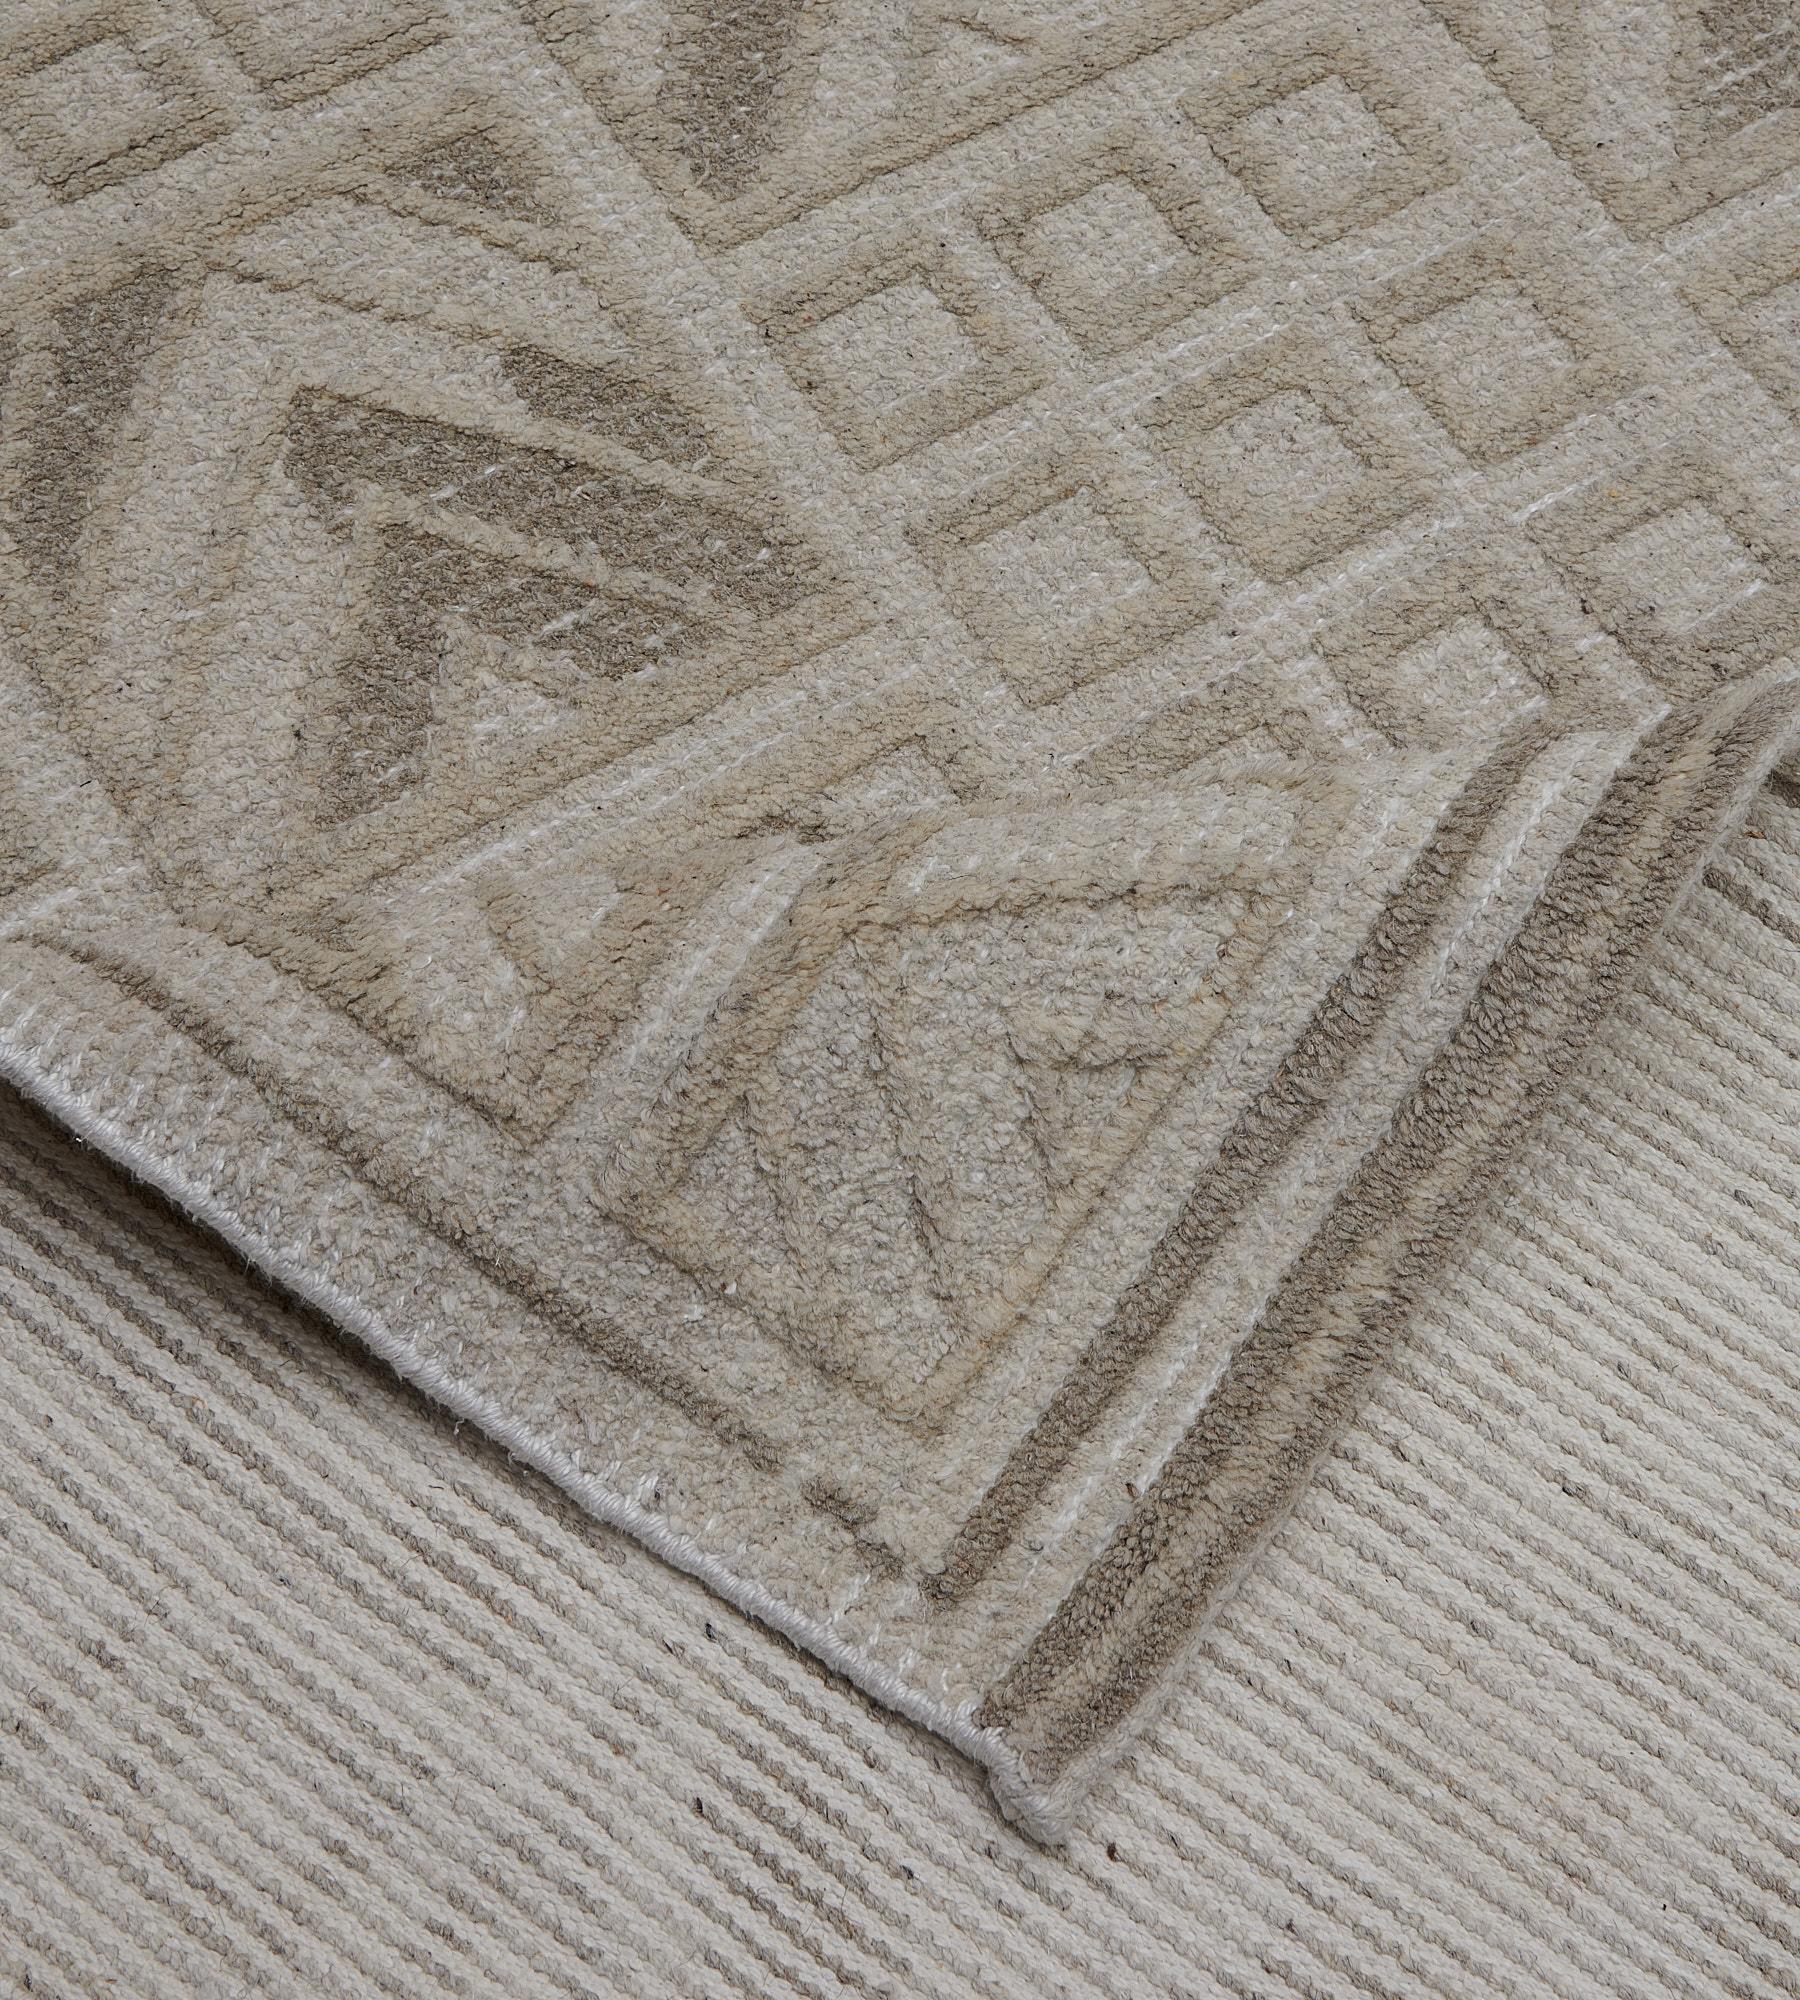 New Handwoven Swedish Inspired Flat-Weave Rug In New Condition For Sale In West Hollywood, CA